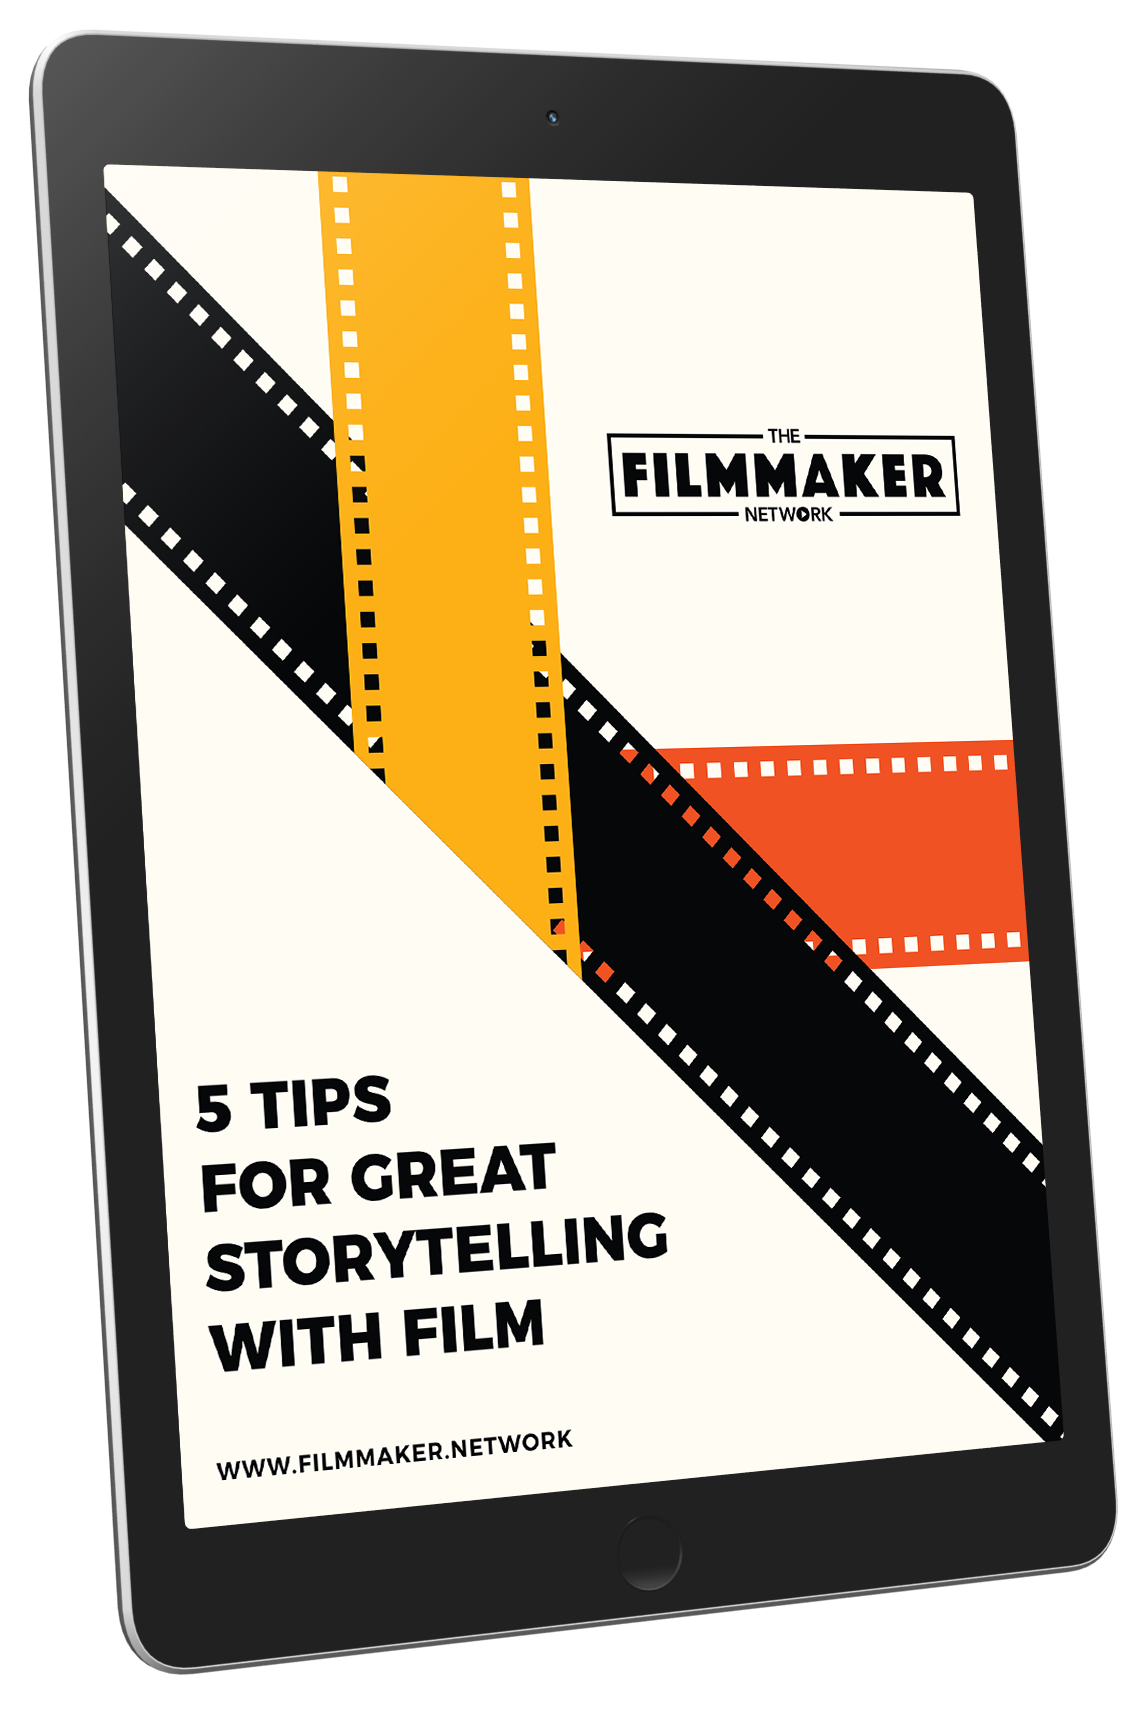 5 Tips for Great Storytelling with Film